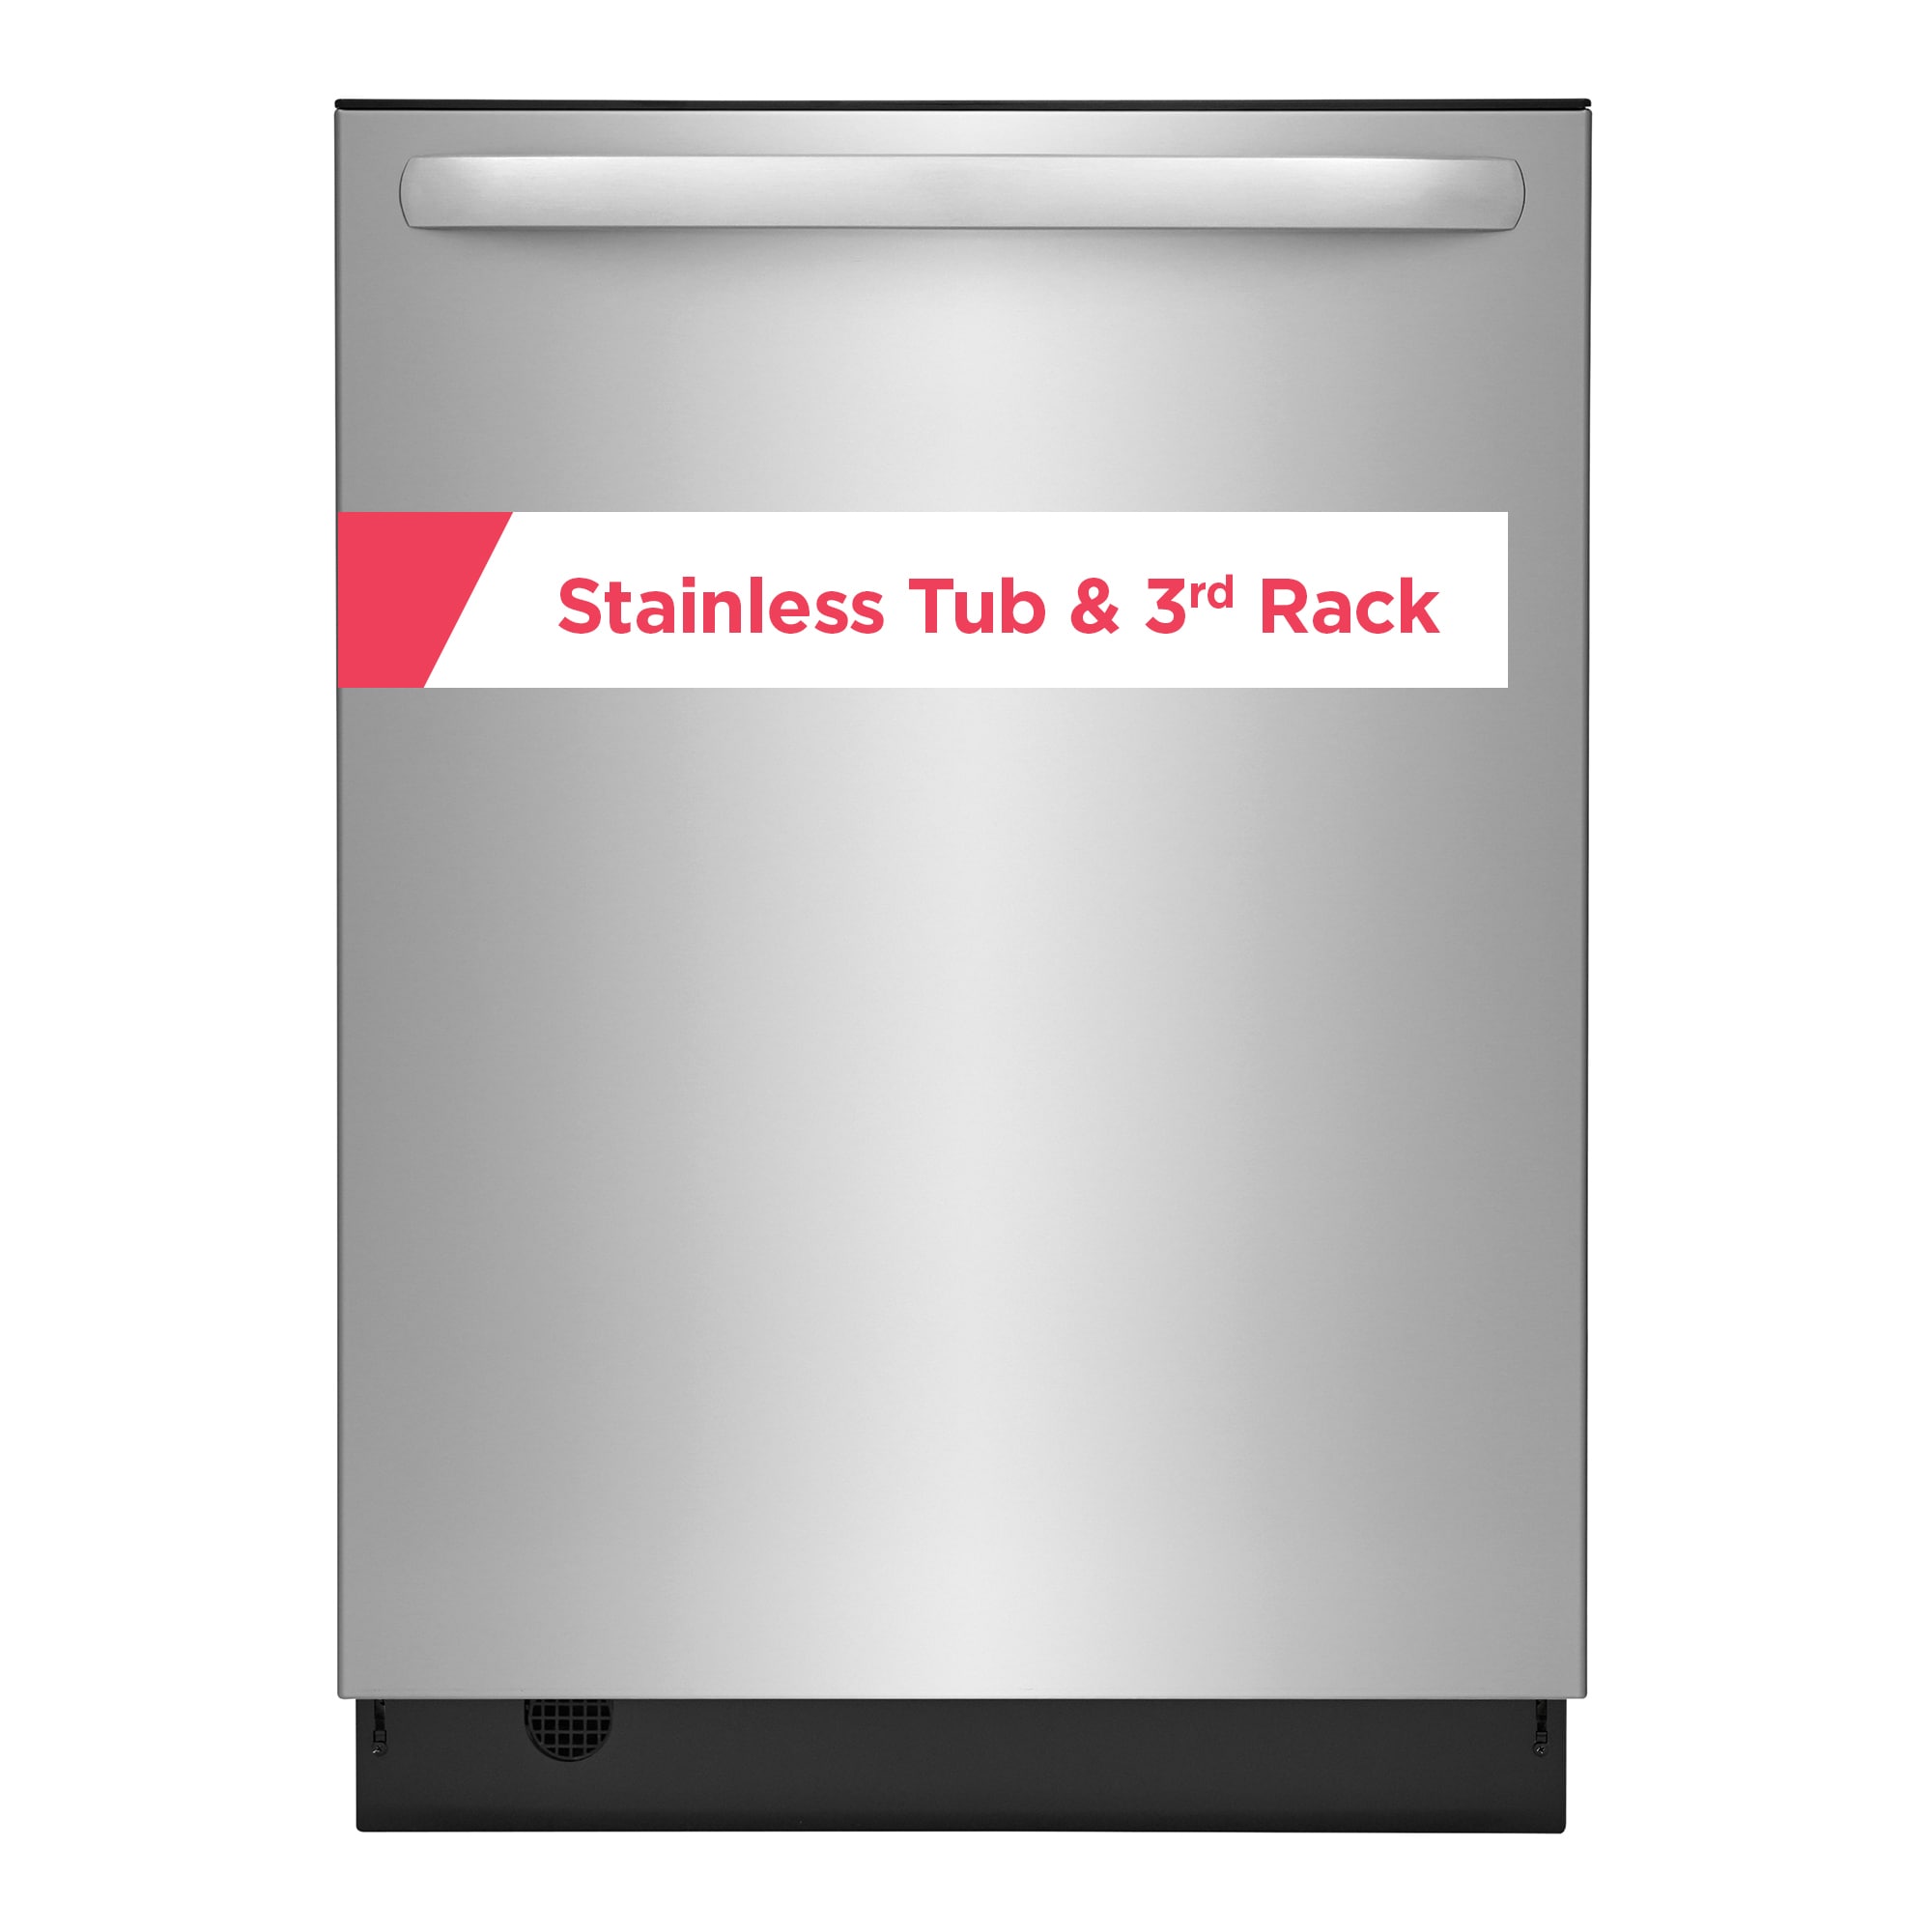 Frigidaire 24 in. Stainless Steel Front Control Smart Built-In Tall Tub  Dishwasher FDPC4221AS - The Home Depot